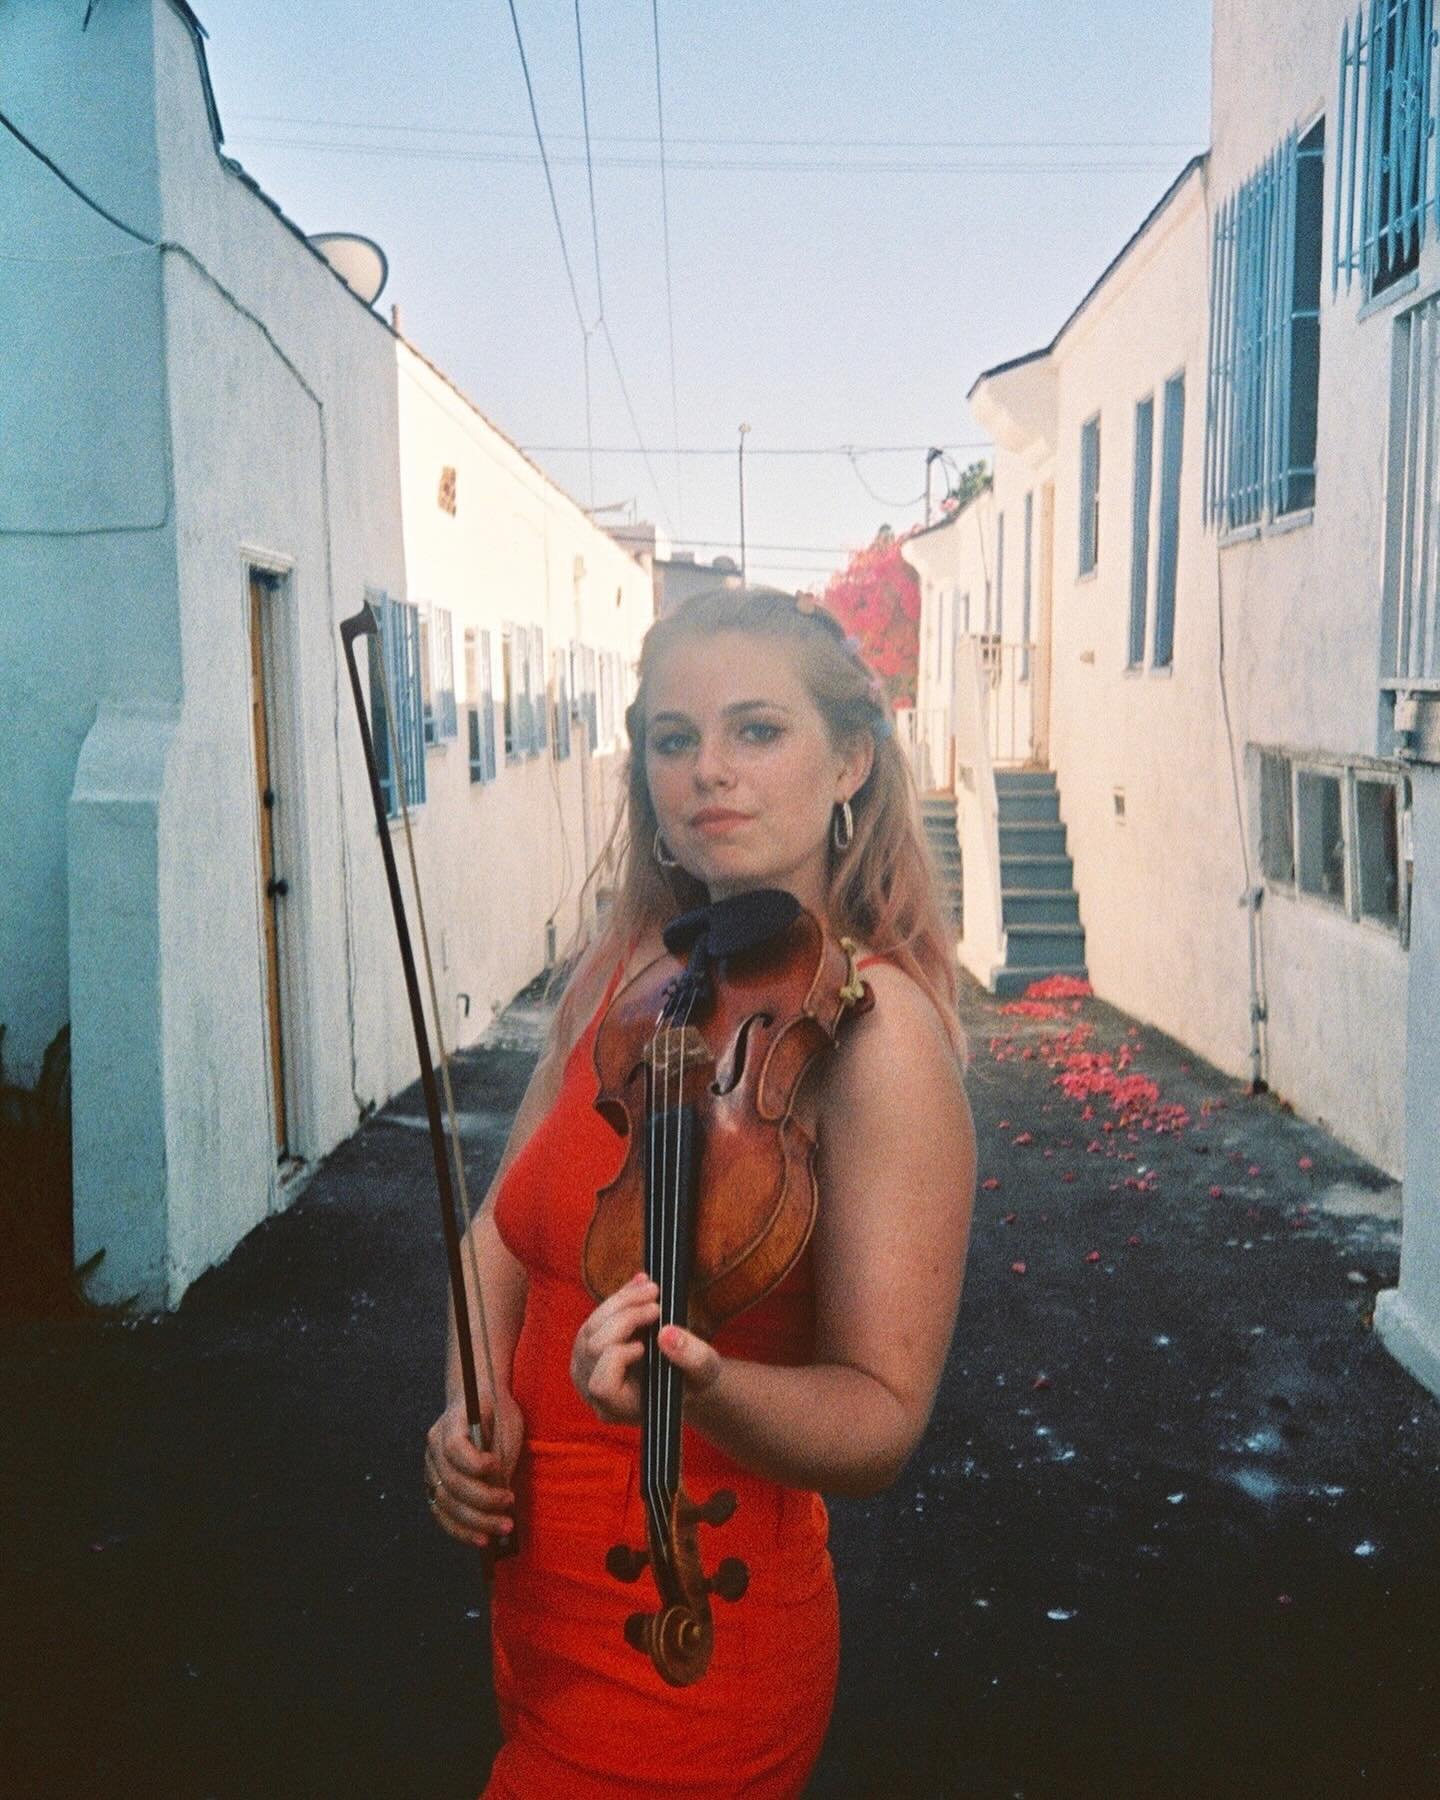 Can&rsquo;t wait for this Saturday! @lilybelknap plays all kinds of genres on her violin including celtic, country and classical! You don&rsquo;t want to miss this! See you this Saturday. Get your ticket through the link in our bio! This Saturday 7:3